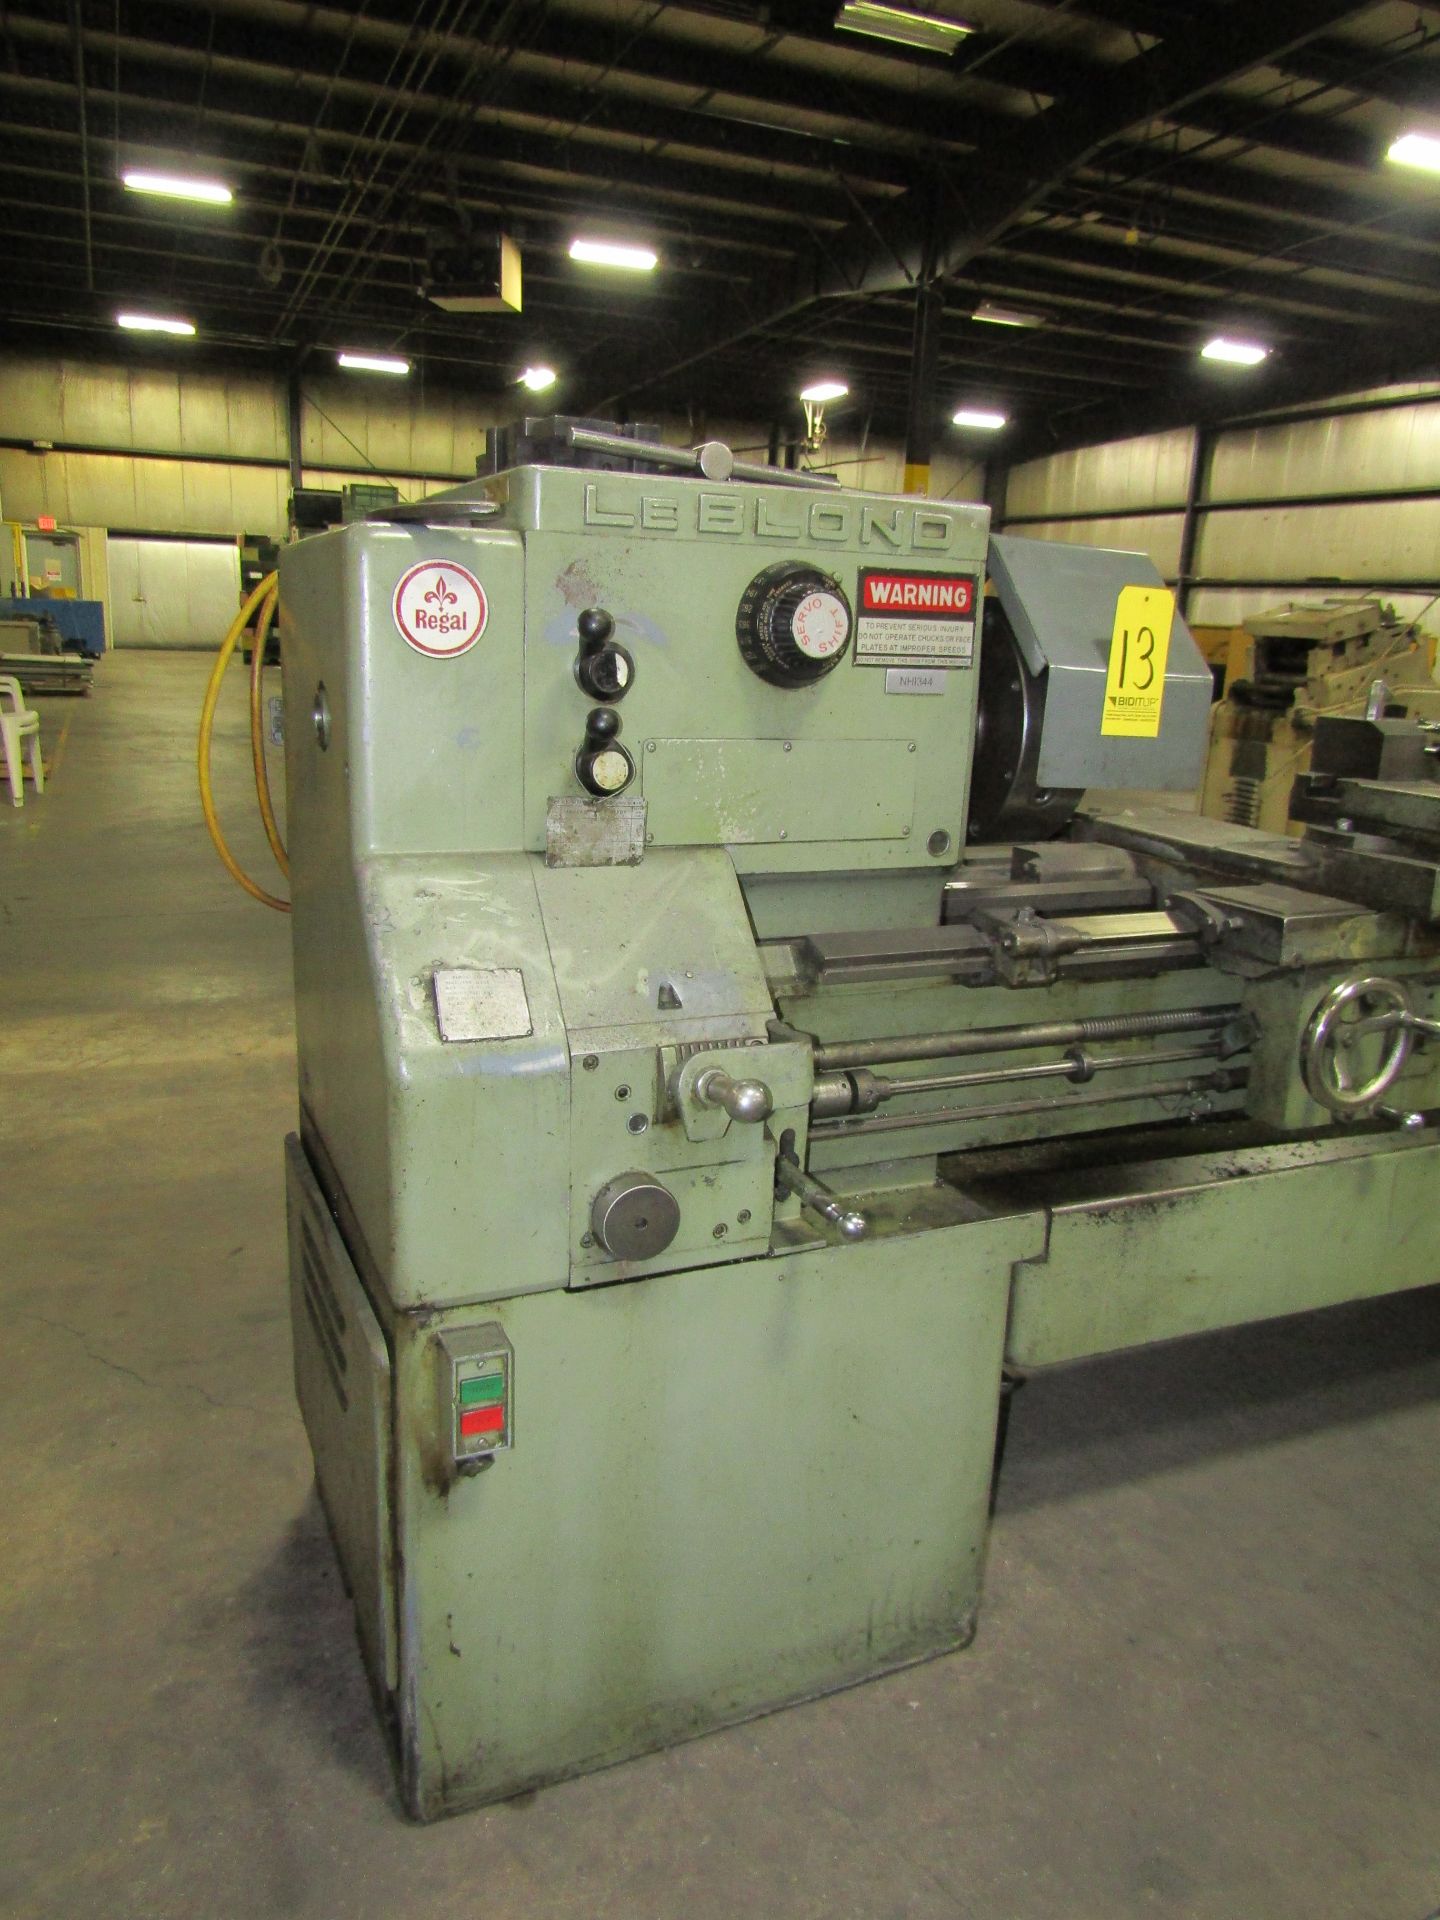 Leblond Lathe 19 1/2 X 54 S#: 7E2025 W/ 3-Jaw Chuck, 4-Jaw Chuck, And Tool Post - Image 2 of 6